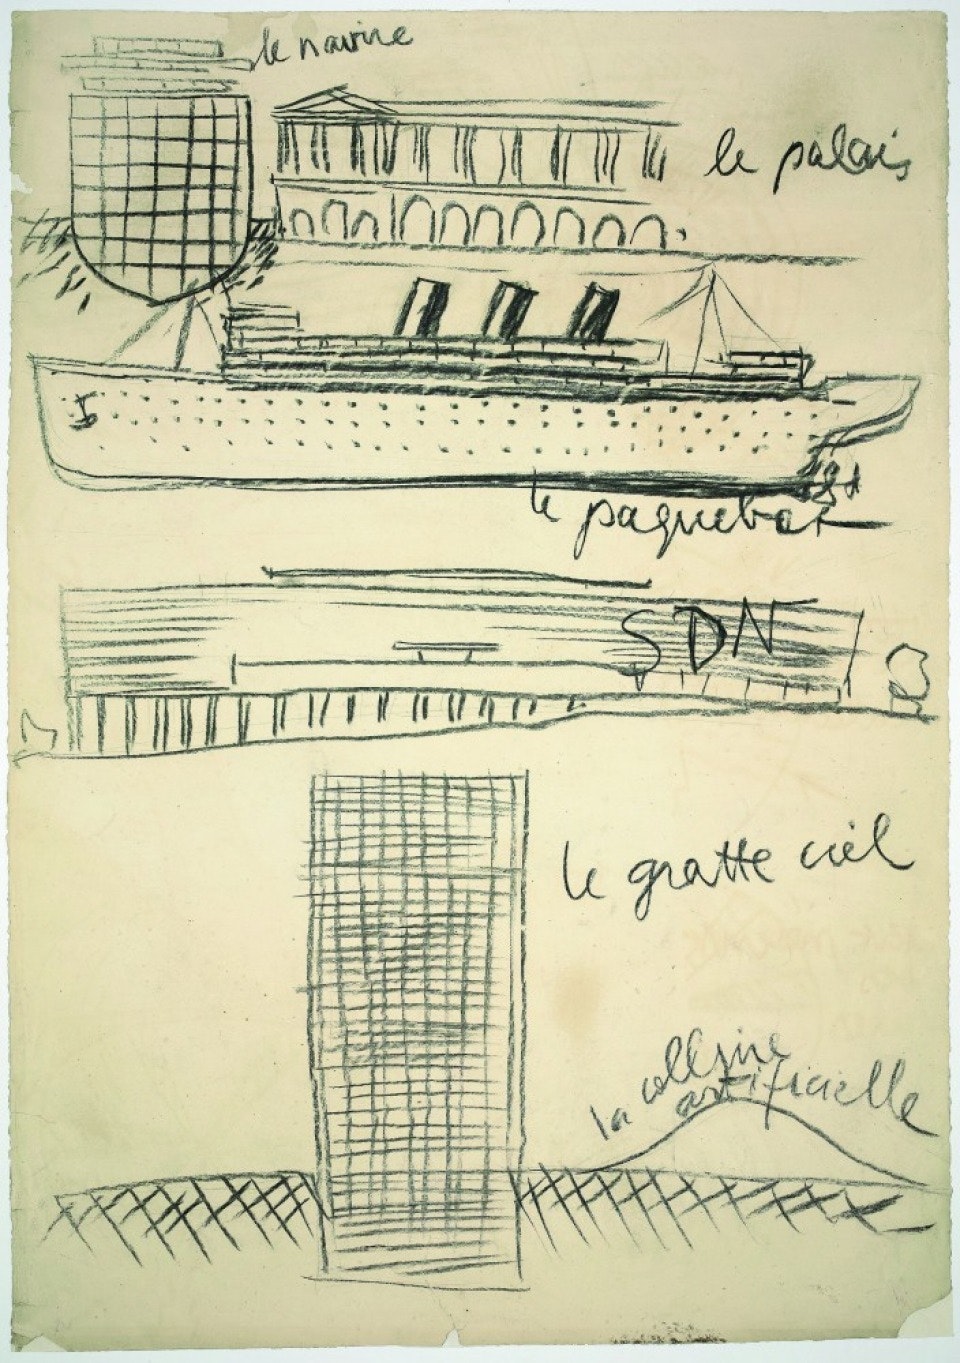 Discover more than 149 sketches by le corbusier super hot